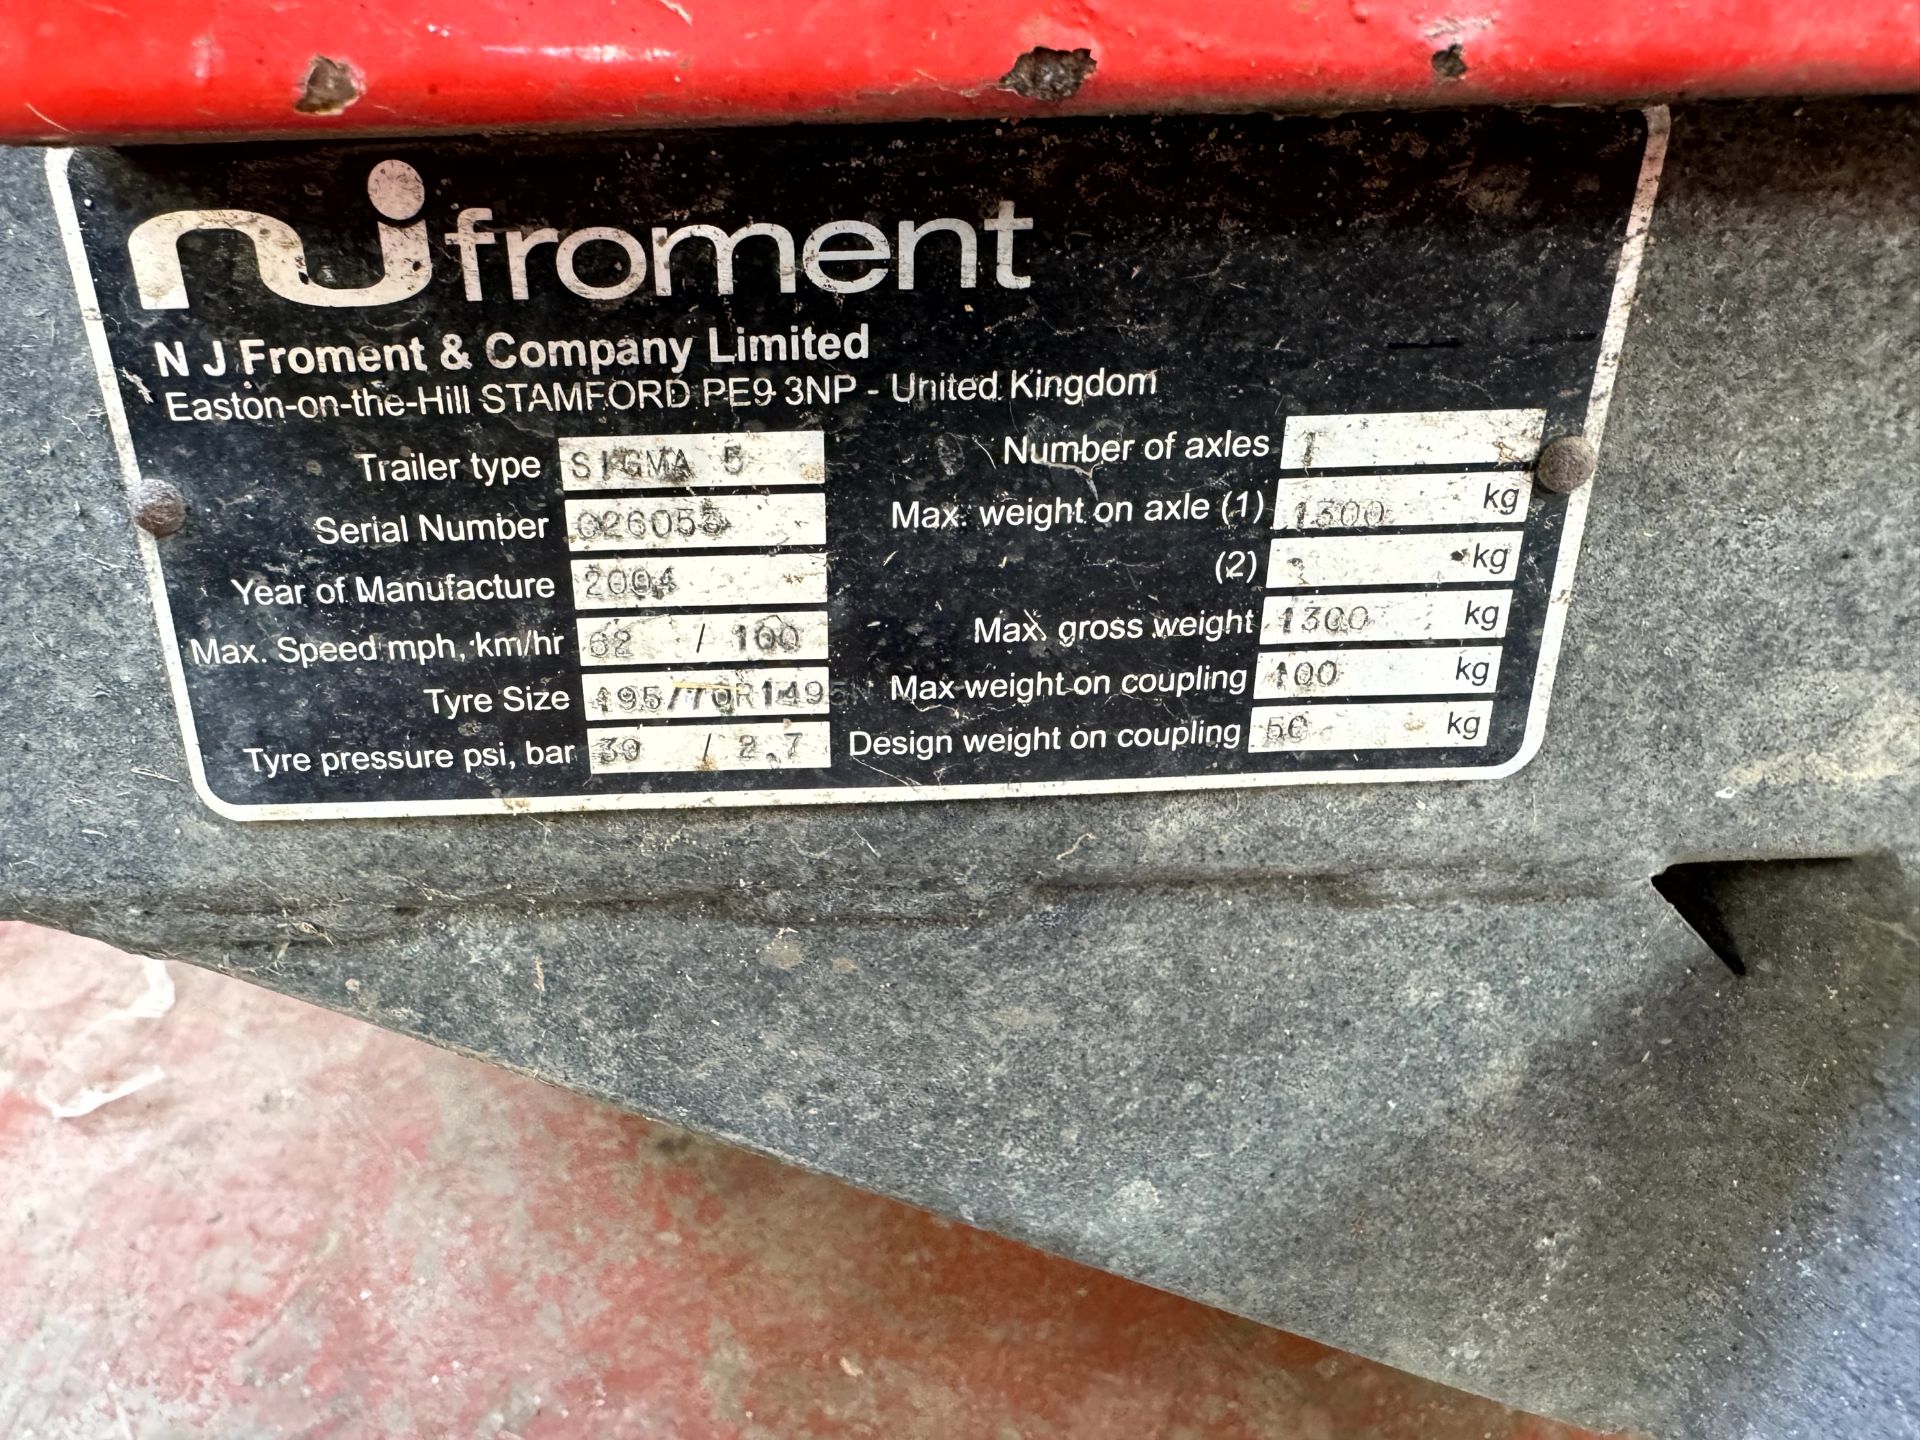 1: N J Froment Sigma 5, Dynamometer , Serial Number: 026053, Year of Manufacture: 2004 - Image 7 of 7